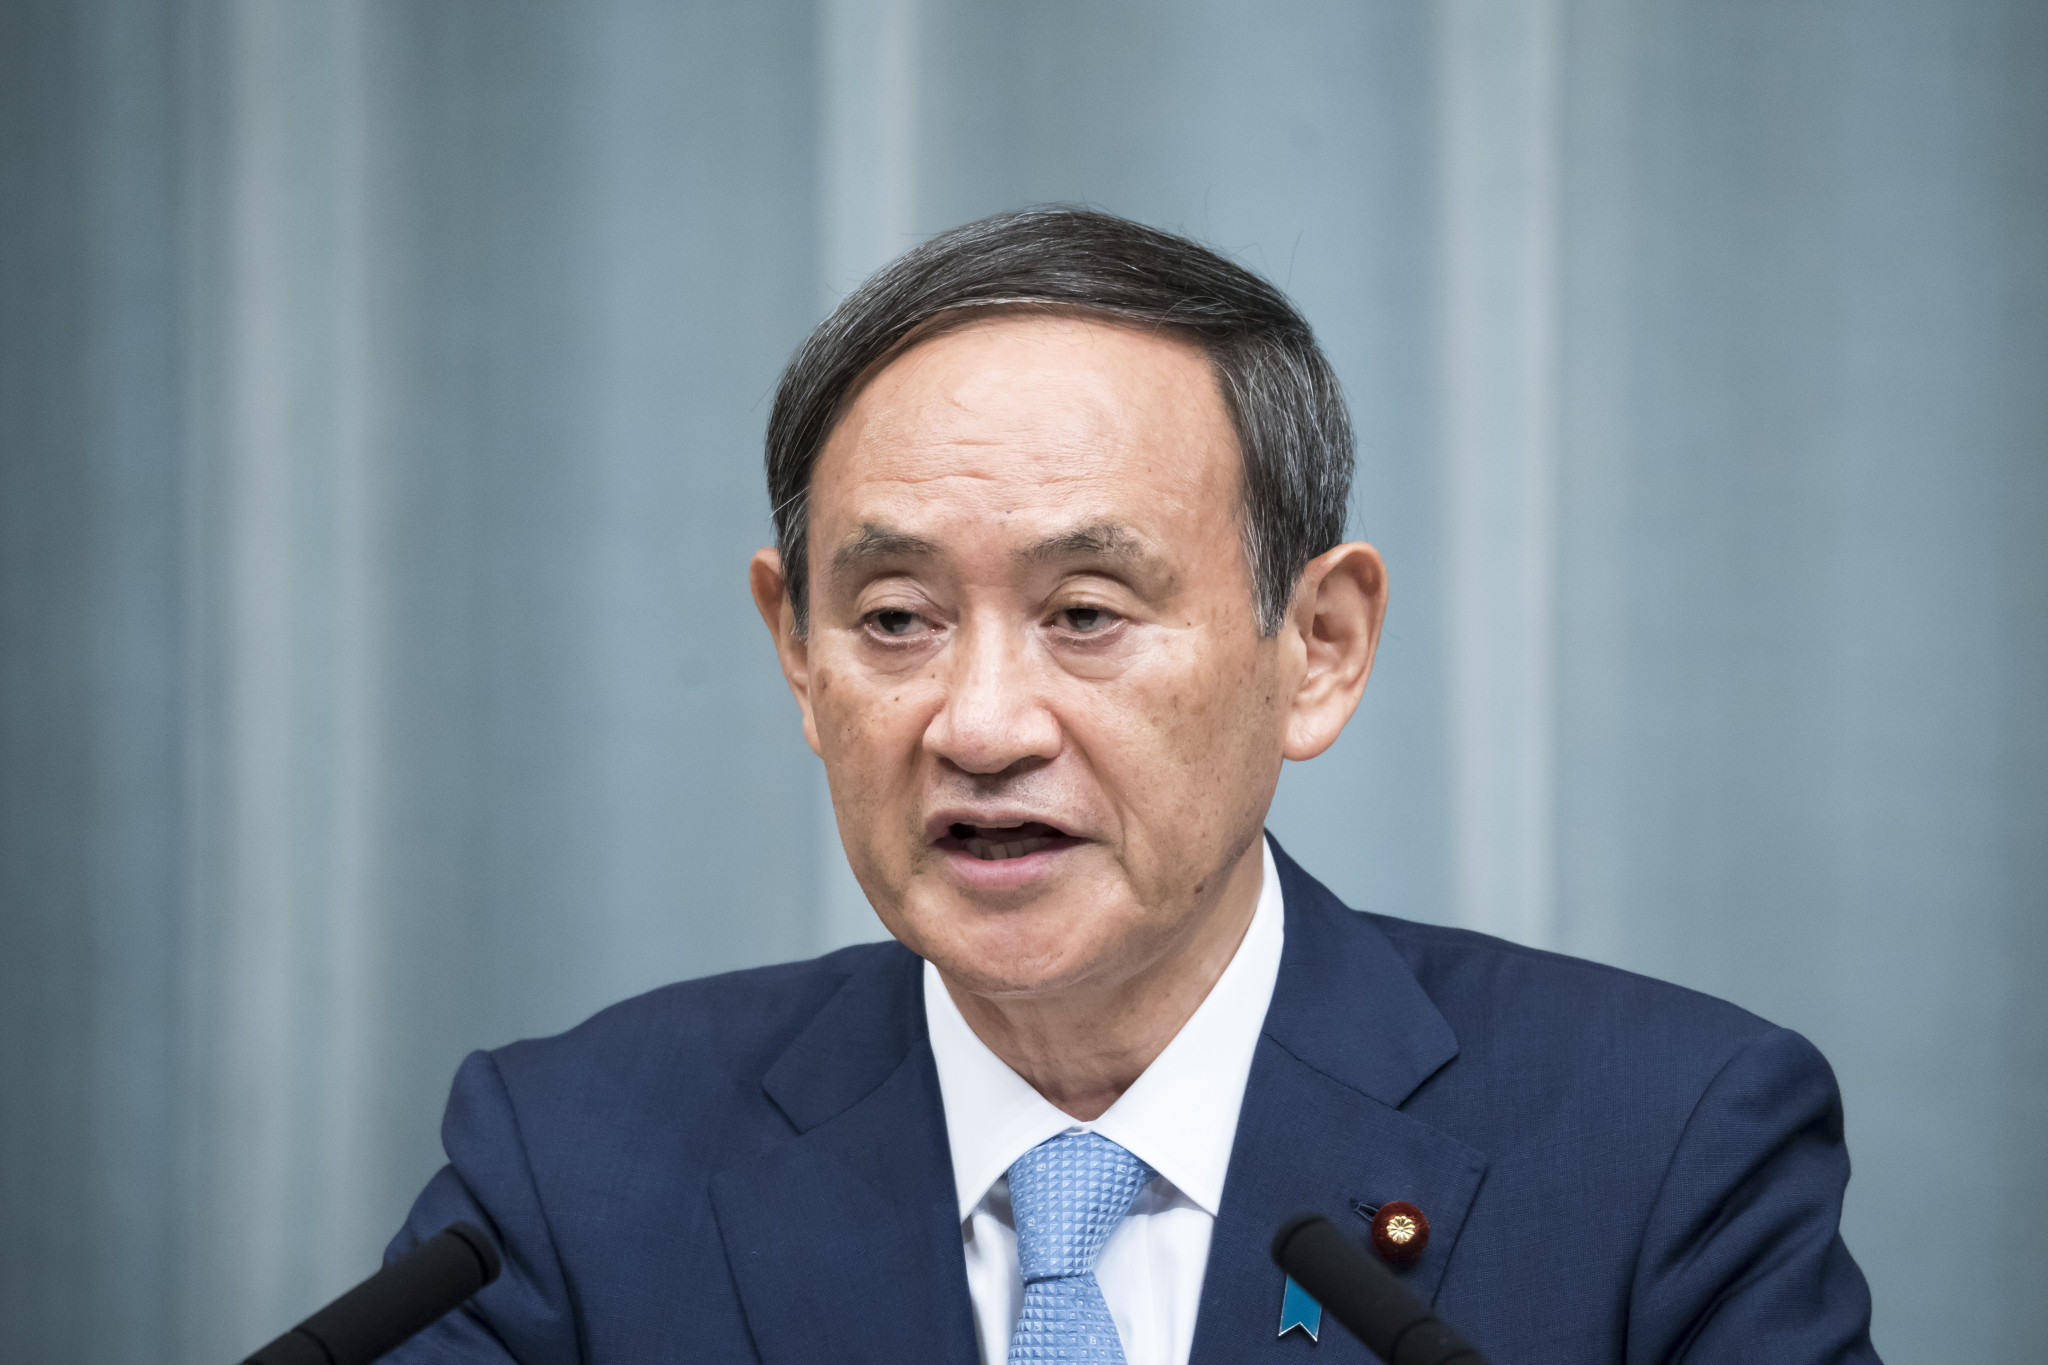 Prime Minister Yoshihide Suga recently apologised for also breaking COVID-19 rules ©Getty Images